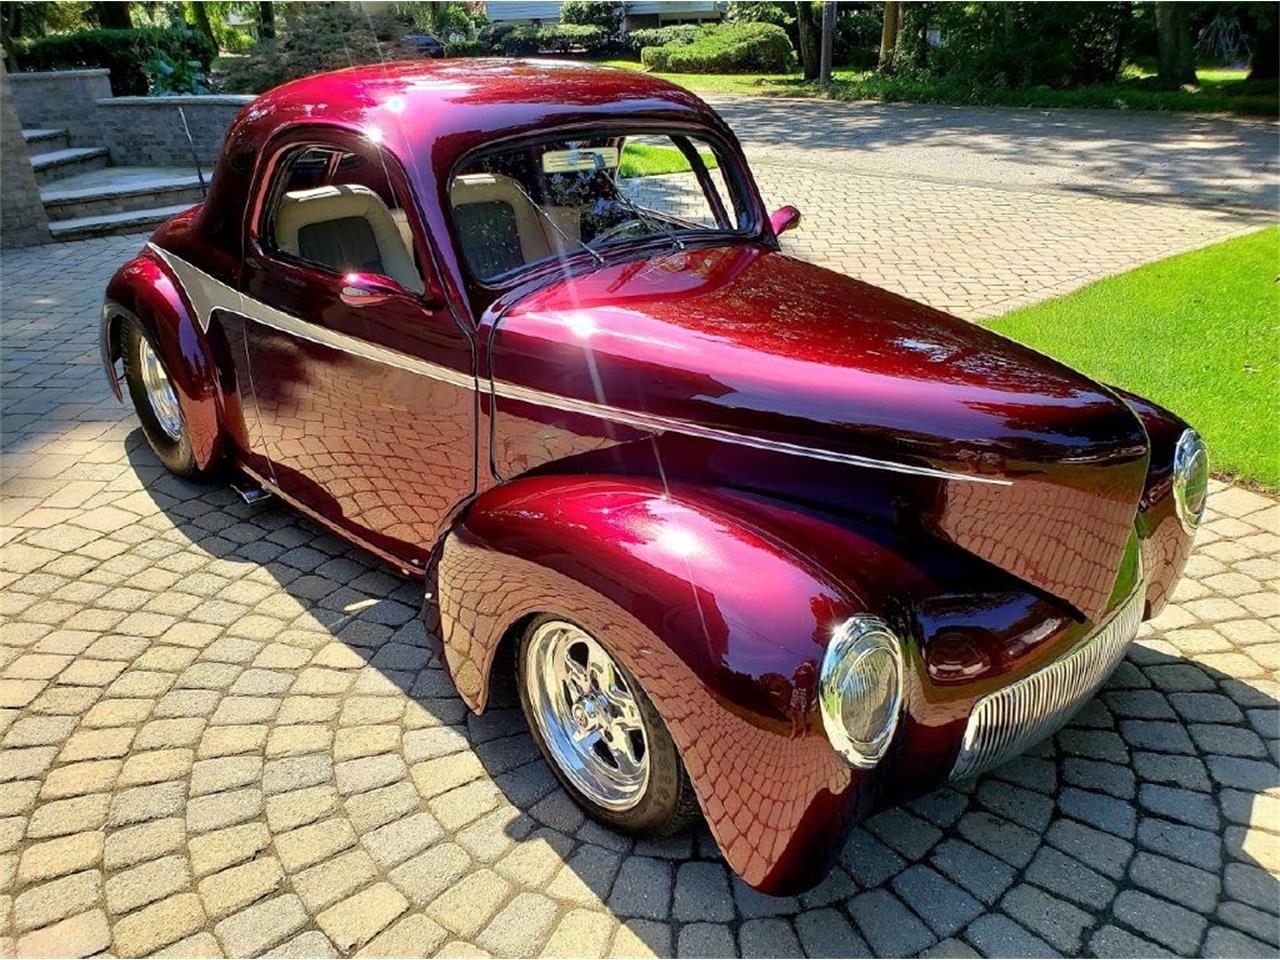 1941 Willys Coupe for Sale | ClassicCars.com | CC-1262266